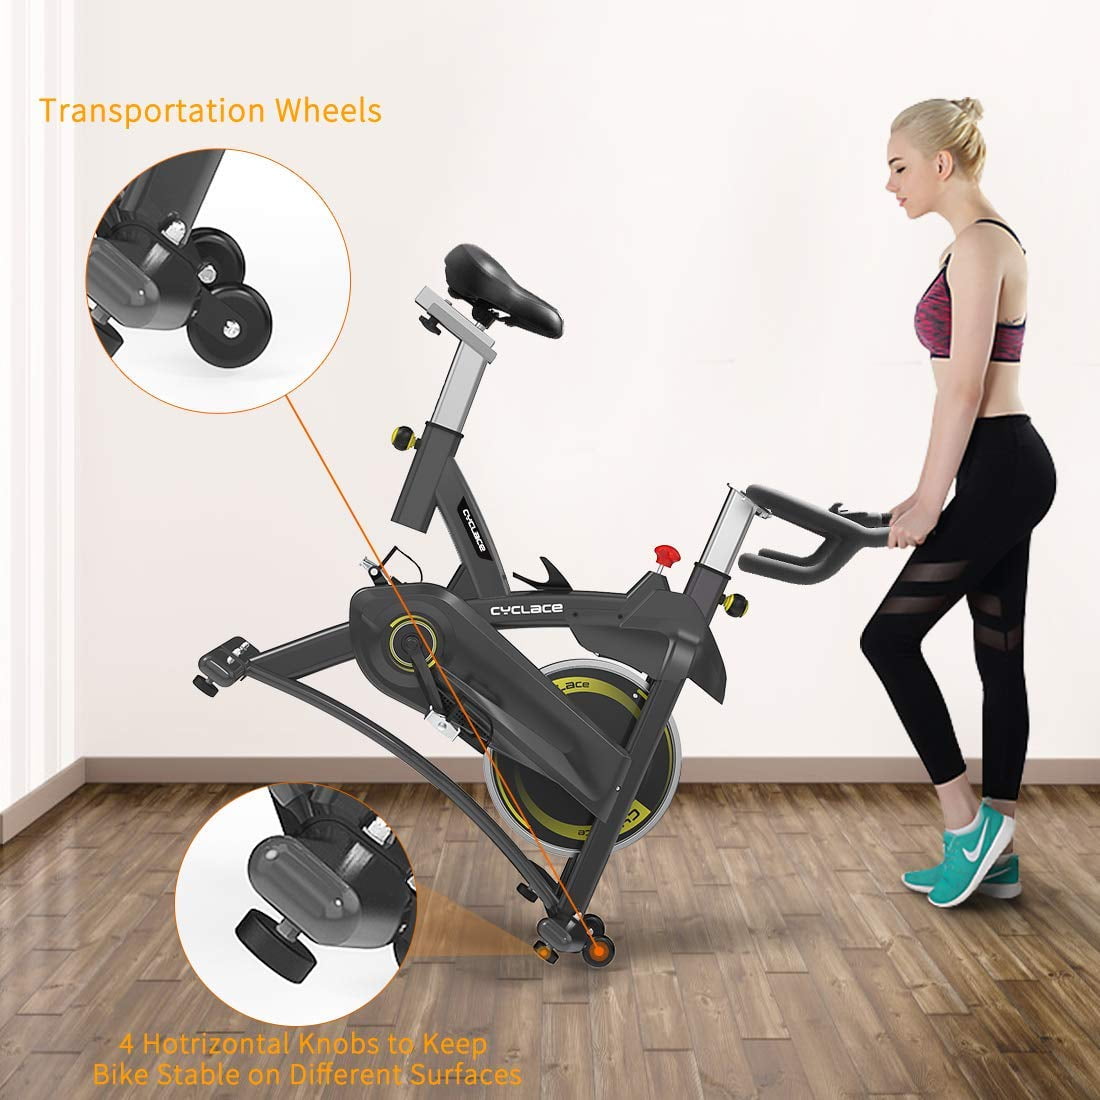 330 Lbs Weight Capacity AJUMKER Exercise Bike Stationary Indoor Cycling Bike with Tablet Holder and LCD Monitor for Home Workout,Quiet design 